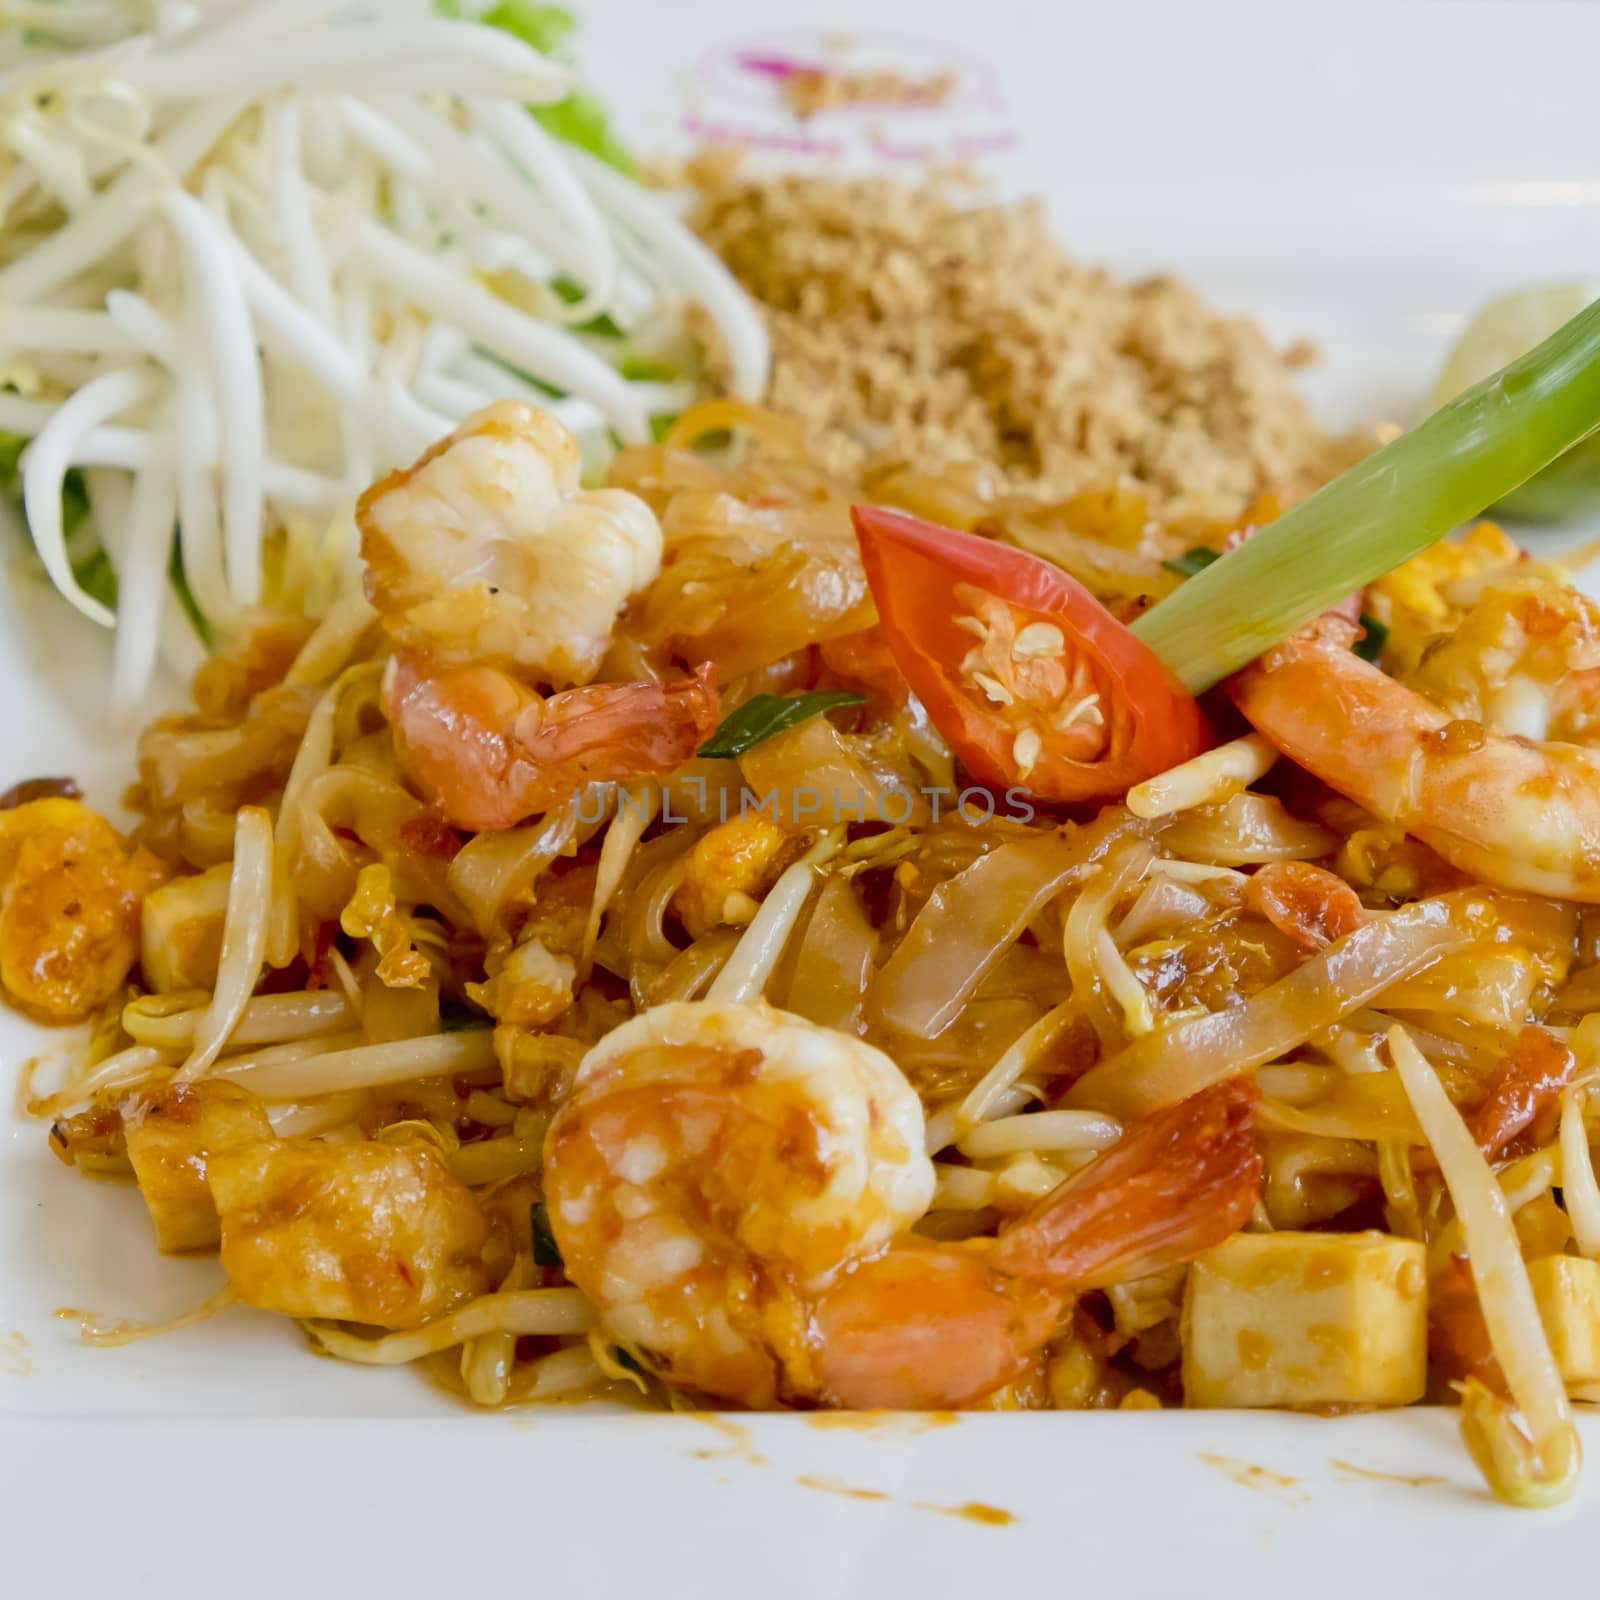 Delicious rice noodles with shrimp close-up on a plate. Thai Dish, in Thai Language we call Pad-Thai